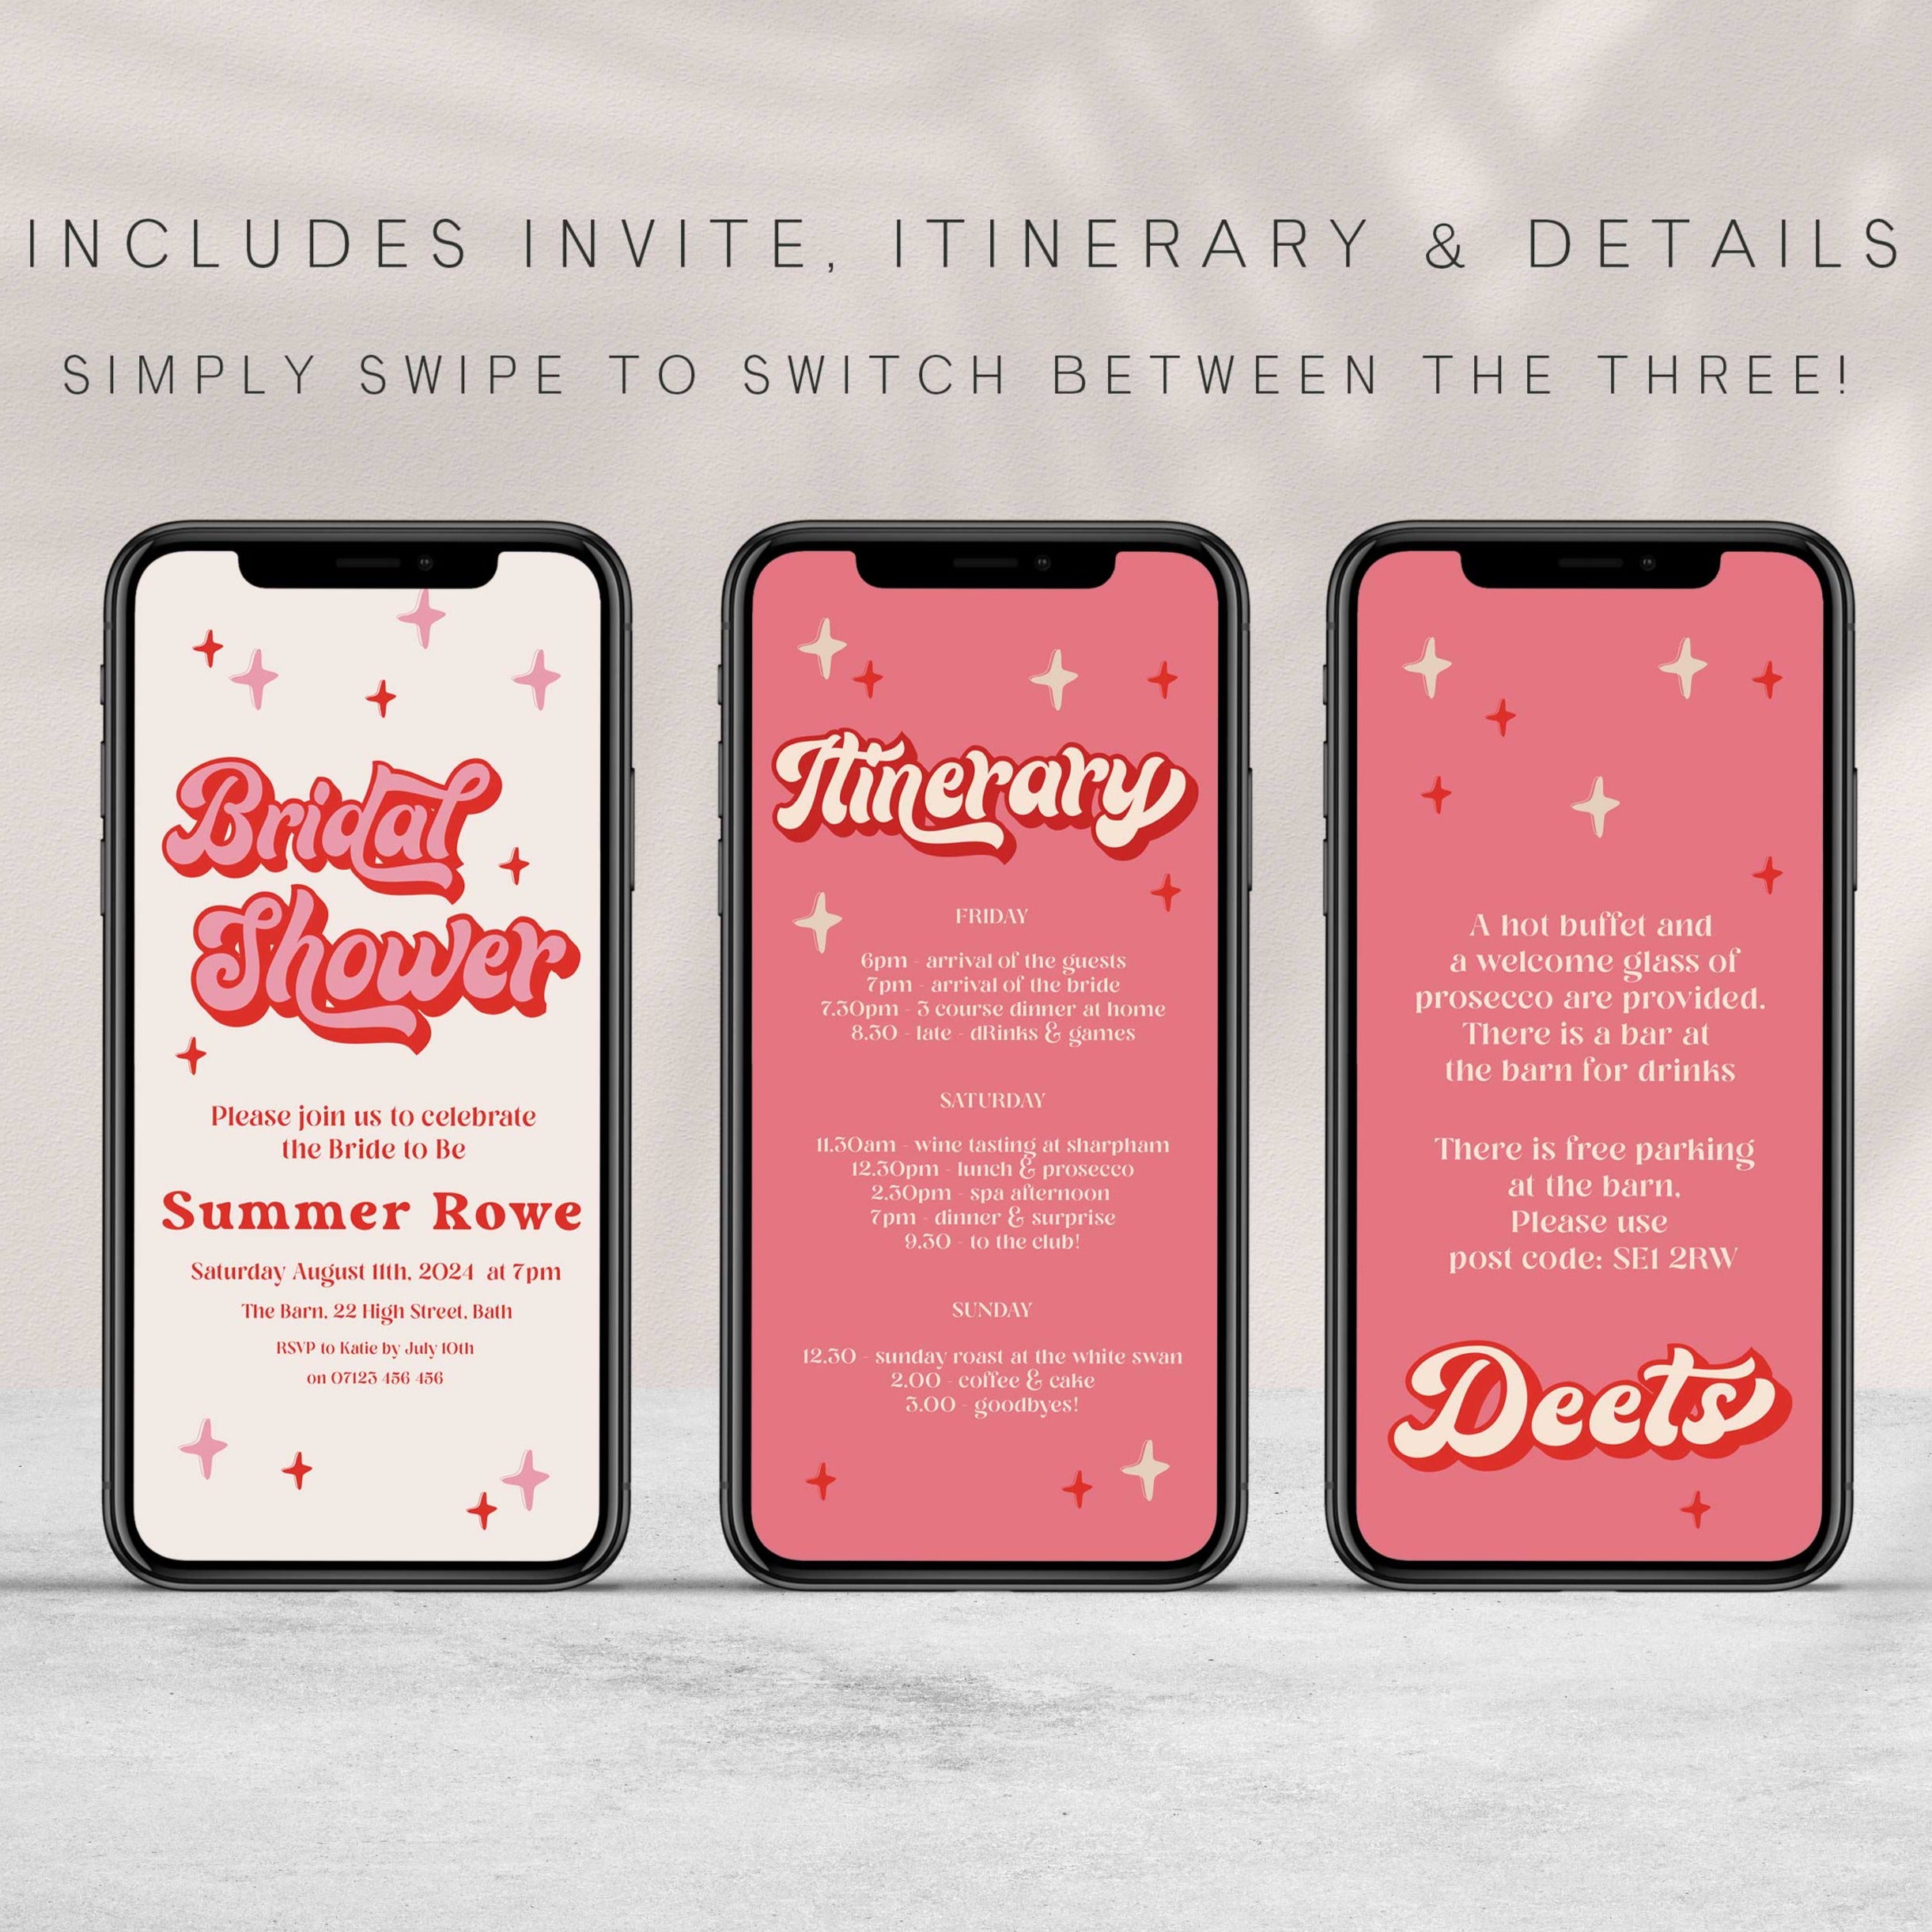 editable bridal shower invitation in a 70s style. Easy to edit and download and ready to send to friends via WhatsApp, Facebook, or SMS